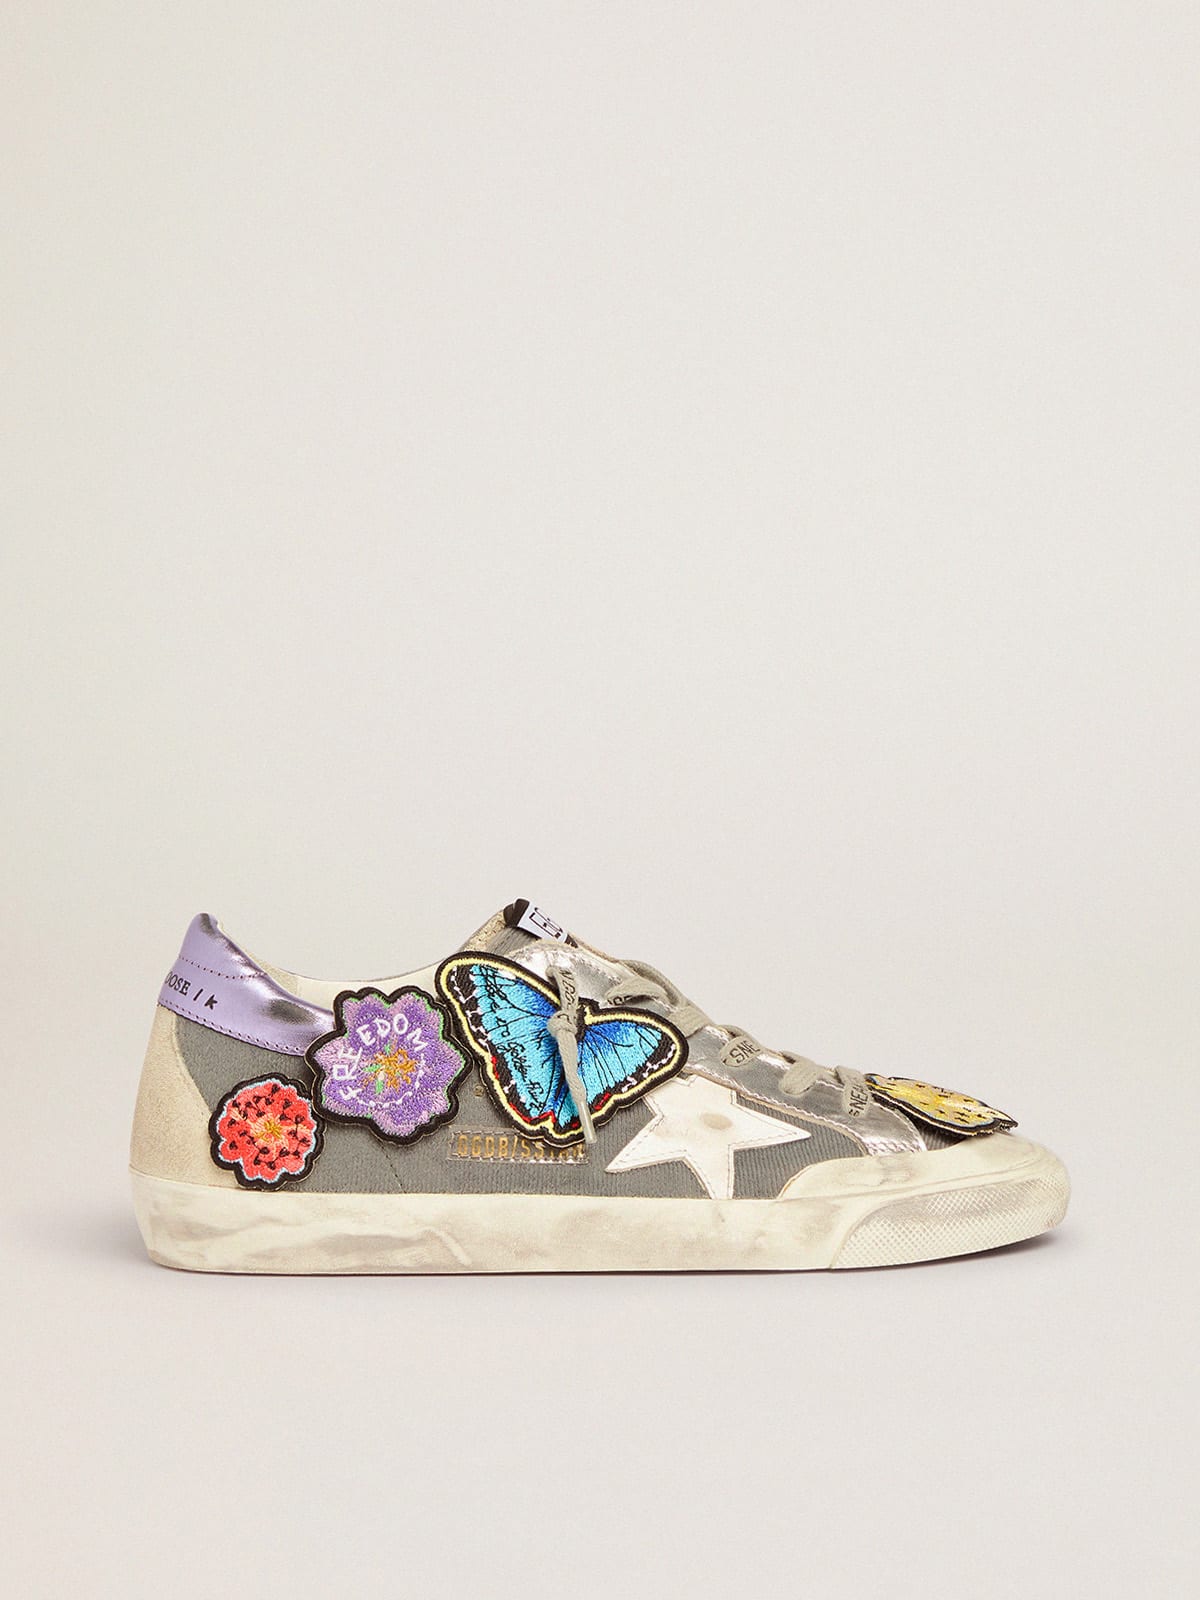 Golden Goose - Super-Star Penstar LAB sneakers with Velcro upper and appliquéd patches in 